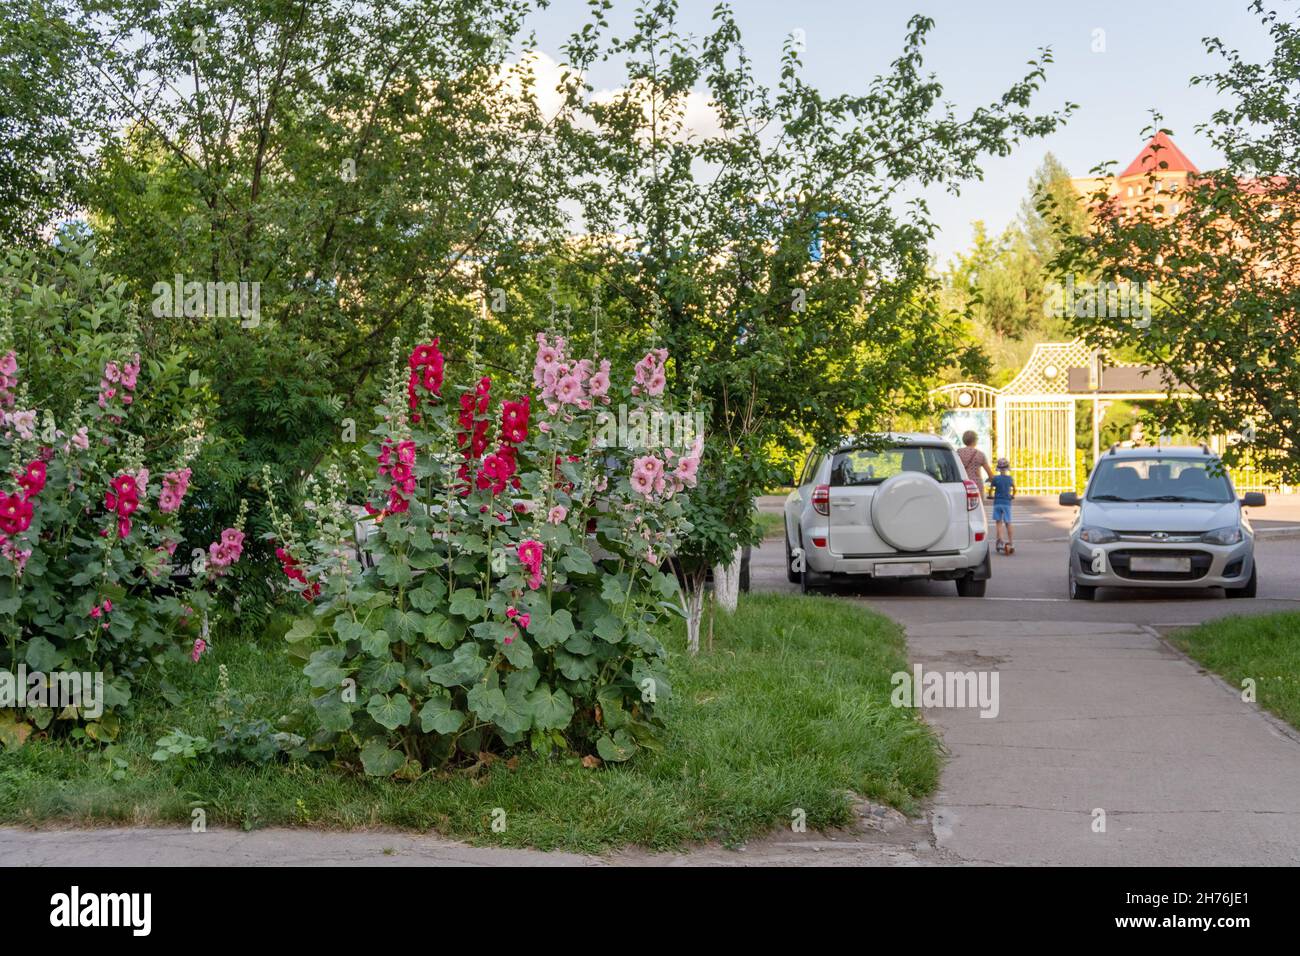 Flowers of pink and red mallow or stockrose (Alcea rosea L.) bloom on the lawn near the sidewalk on a summer day. Stock Photo